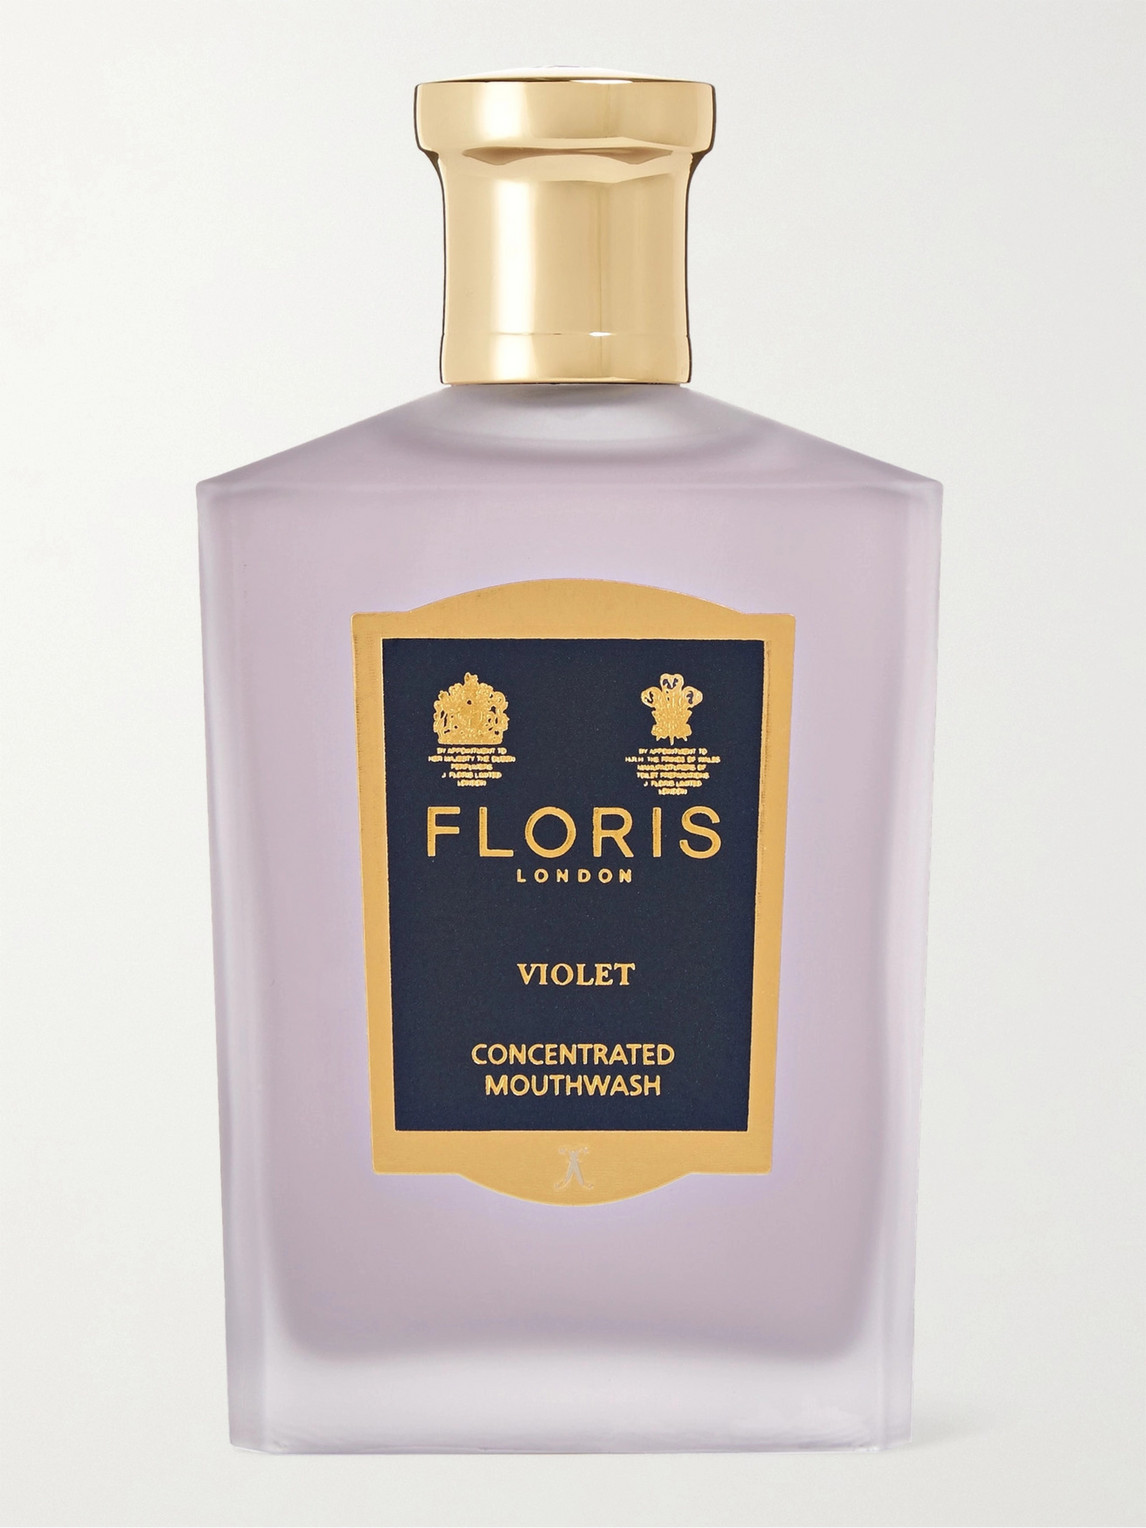 Floris London Violet Concentrated Mouthwash, 100ml In Colorless